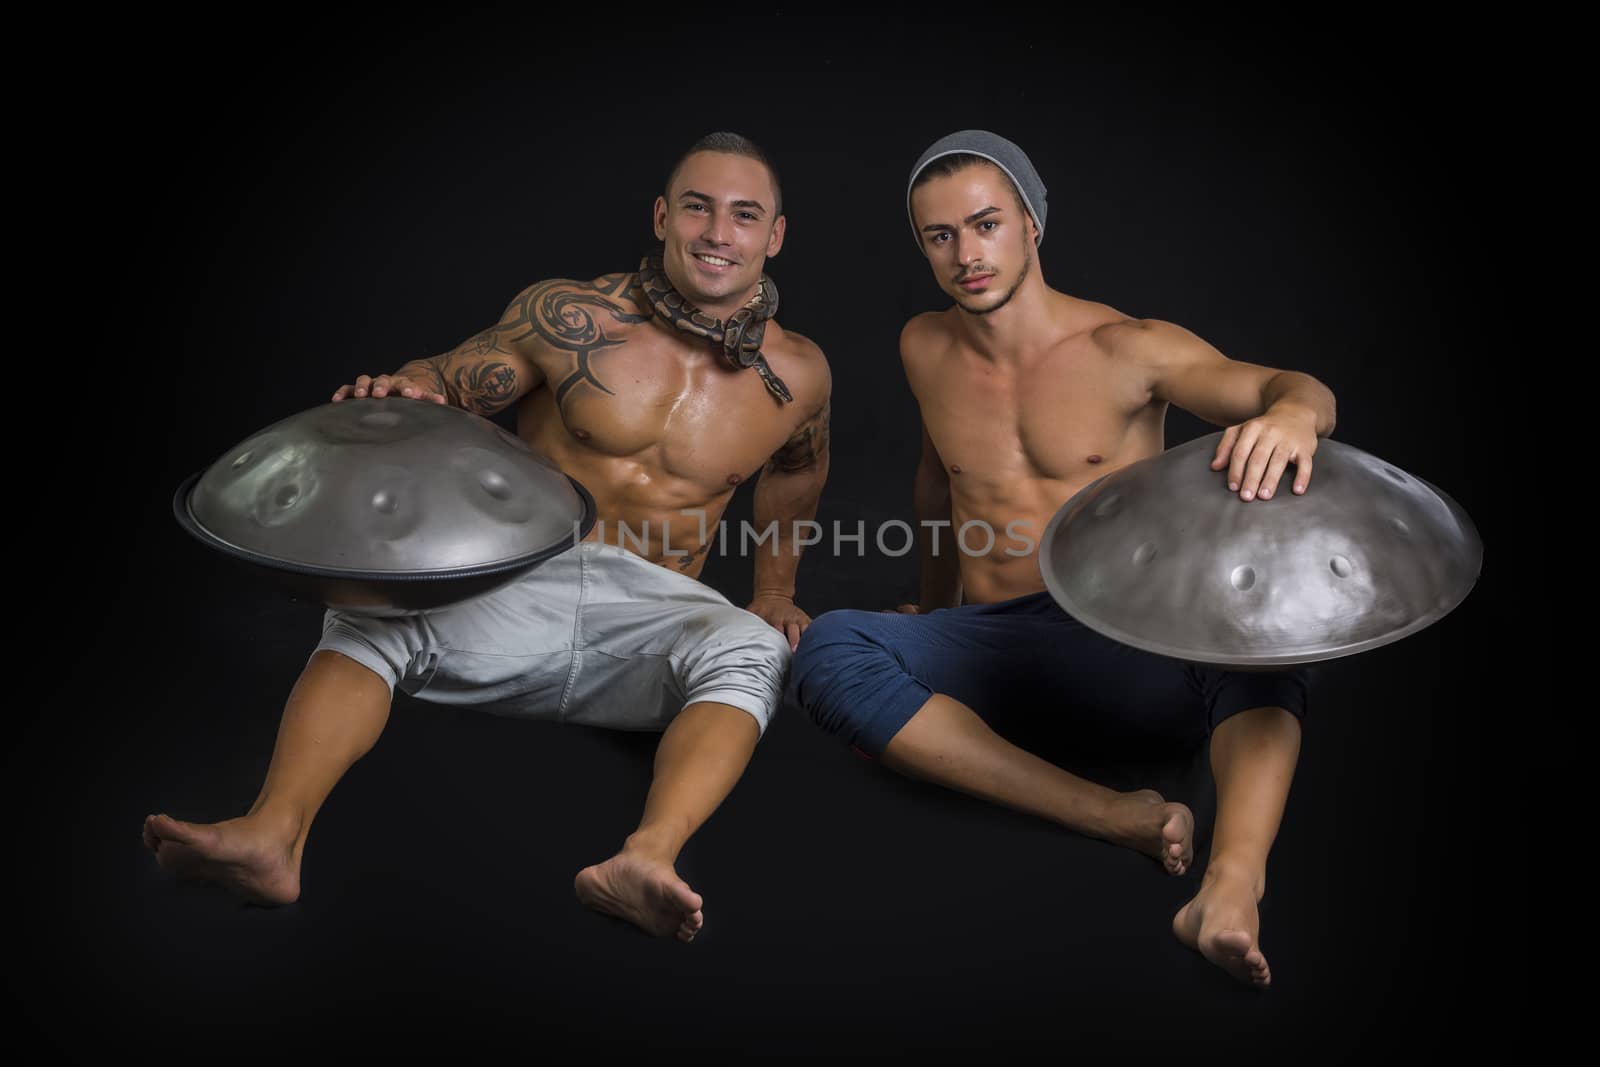 Two Exotic Male Drummers Drumming with Hands on Steel Pan Drums While Seated Beside Each Other in Studio, Isolated on Black Background